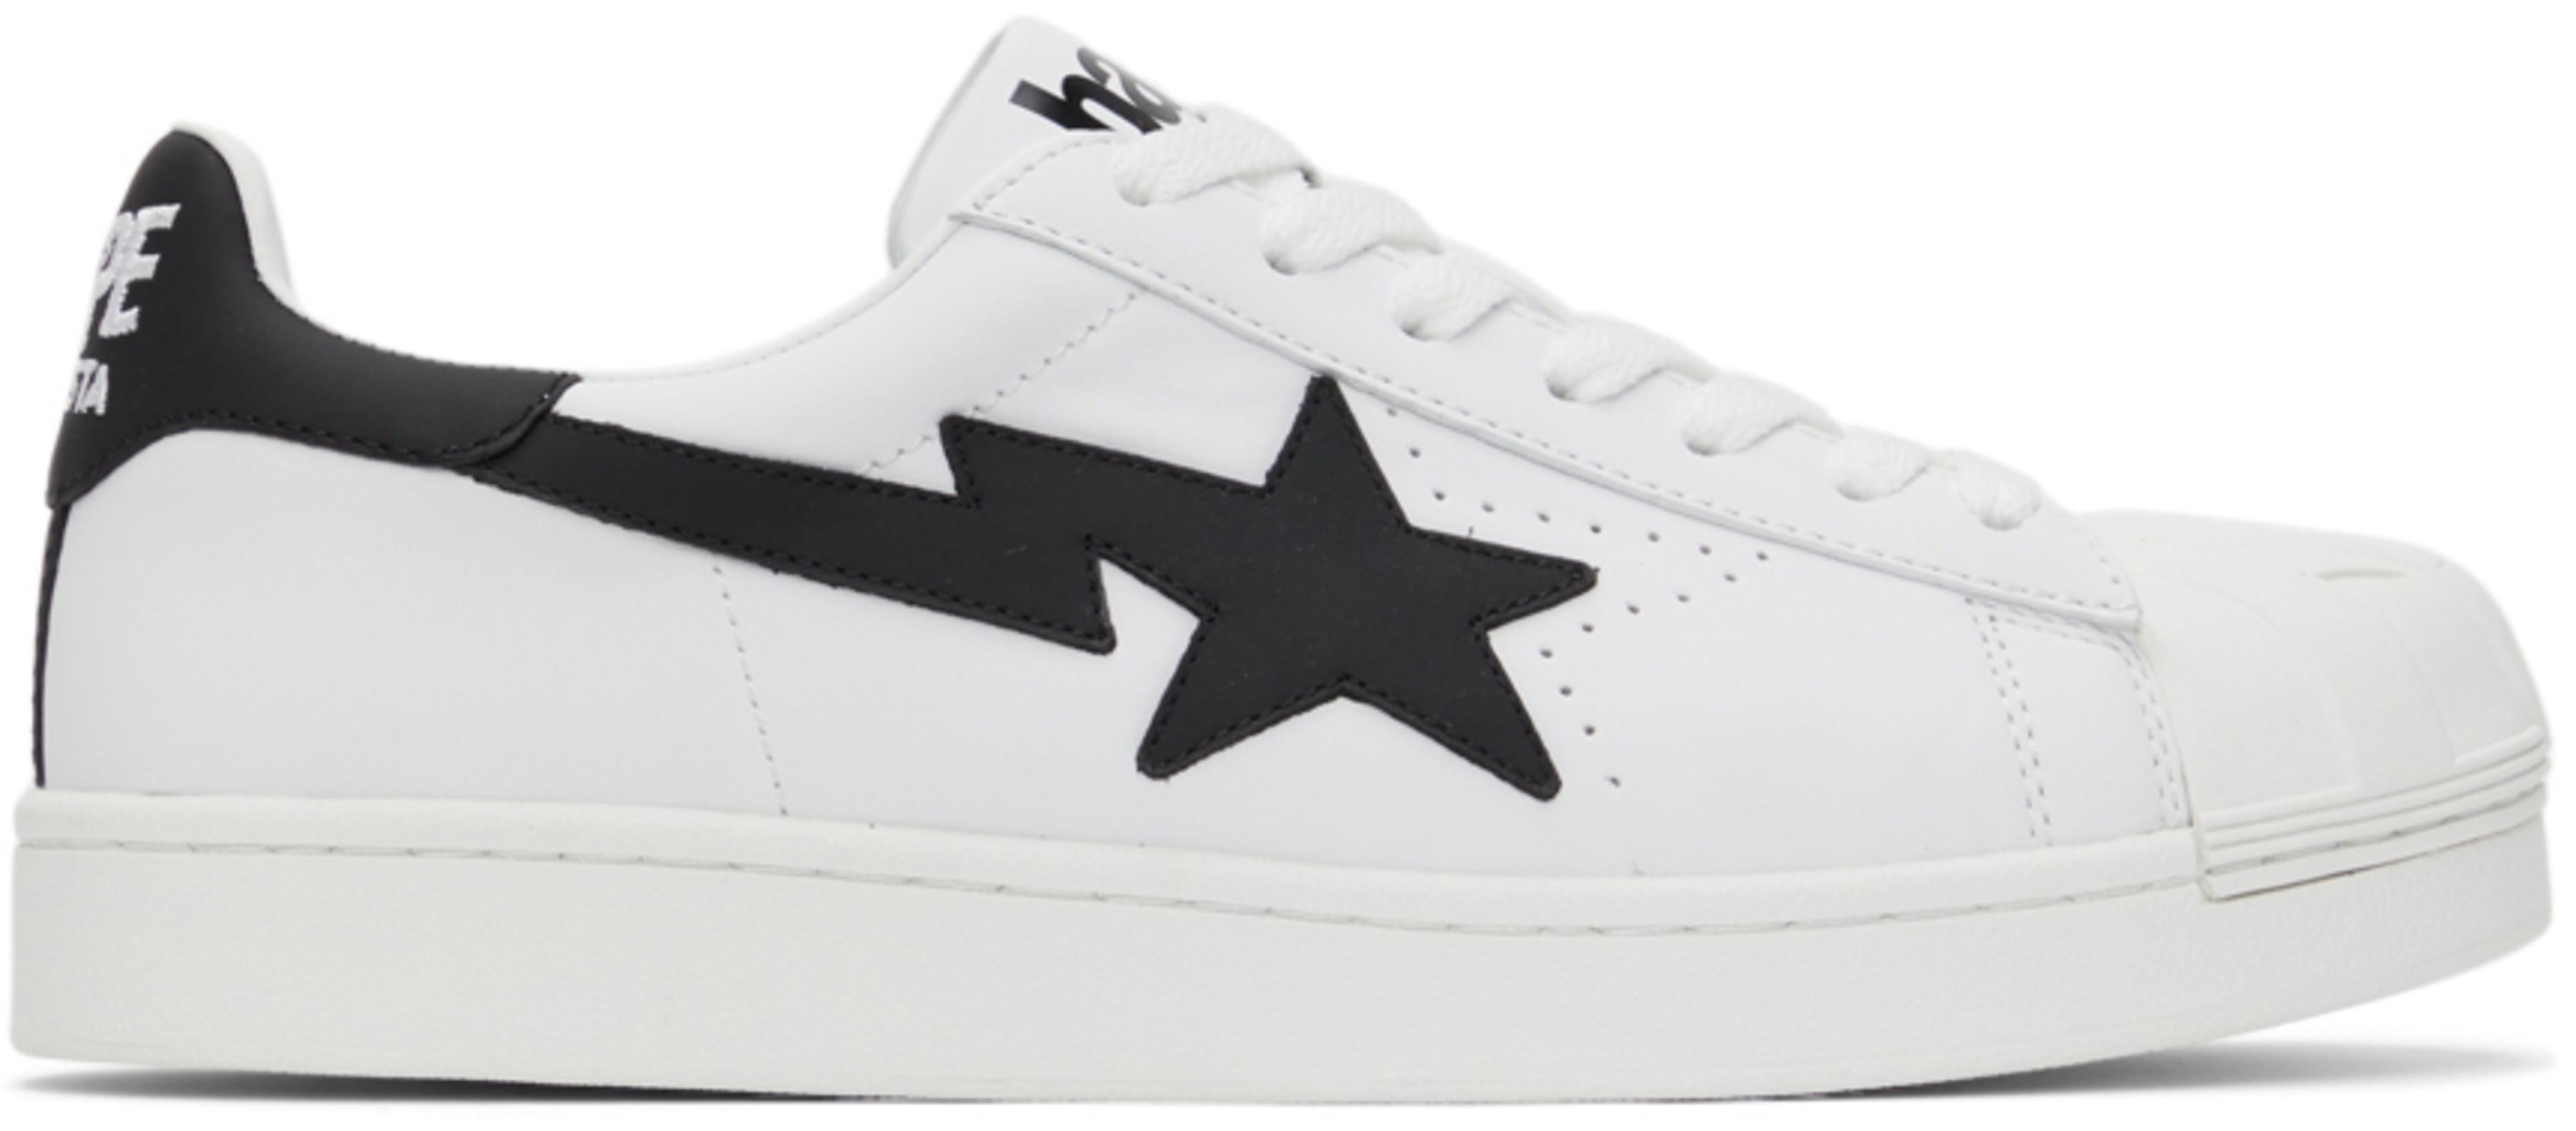 White Sta Low Sneakers by BAPE